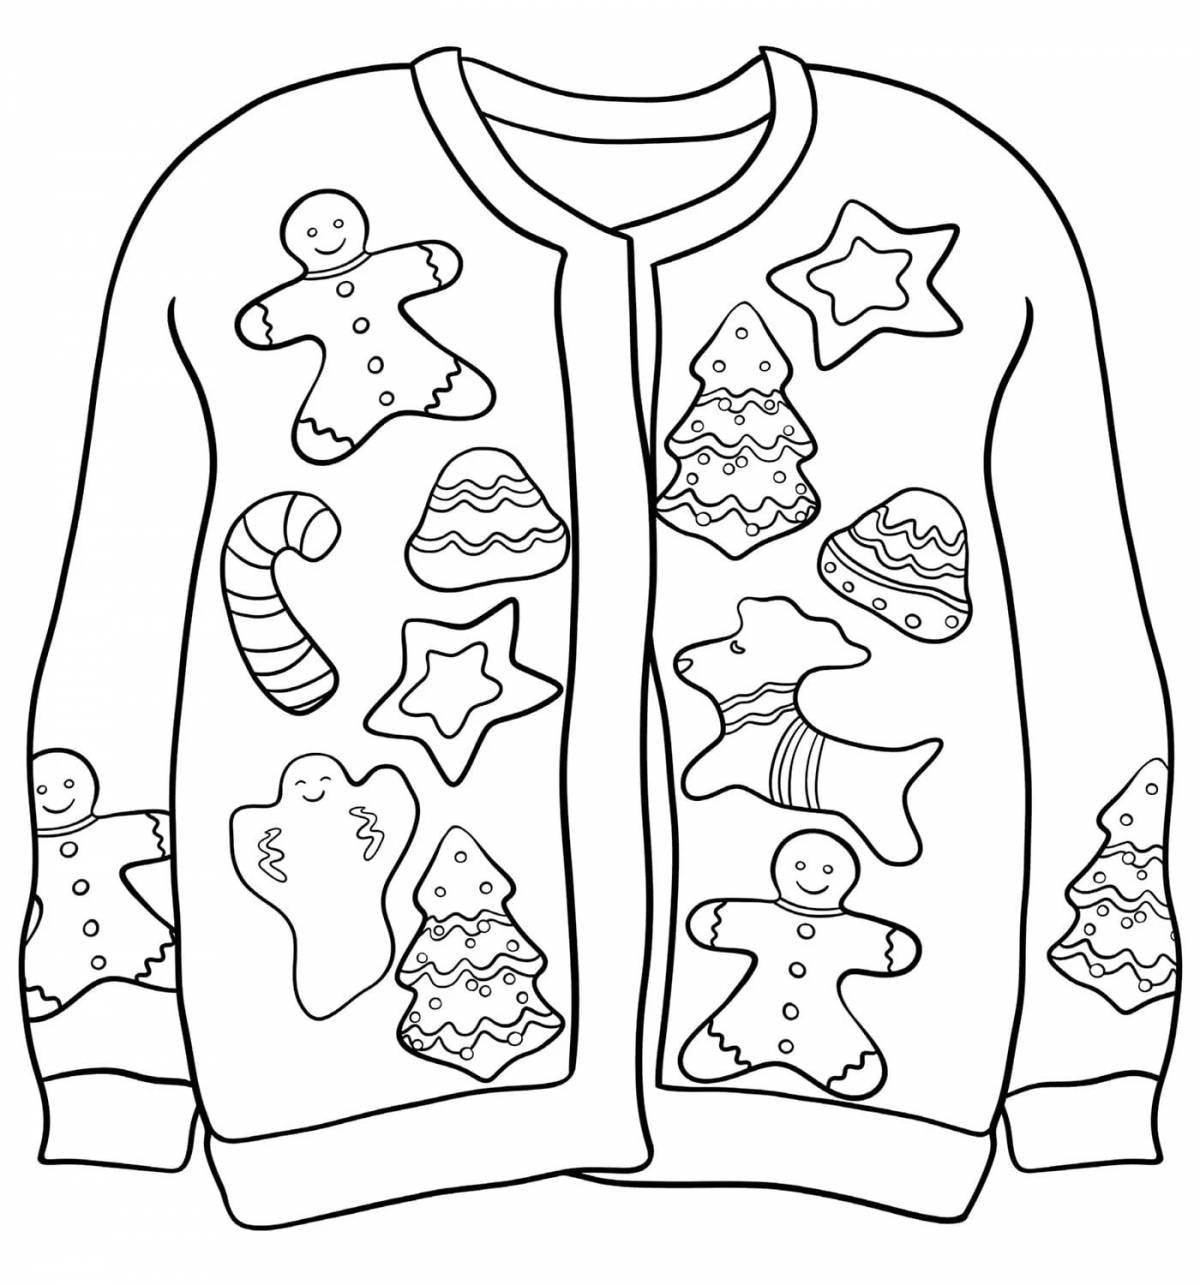 Dazzling jumper coloring page